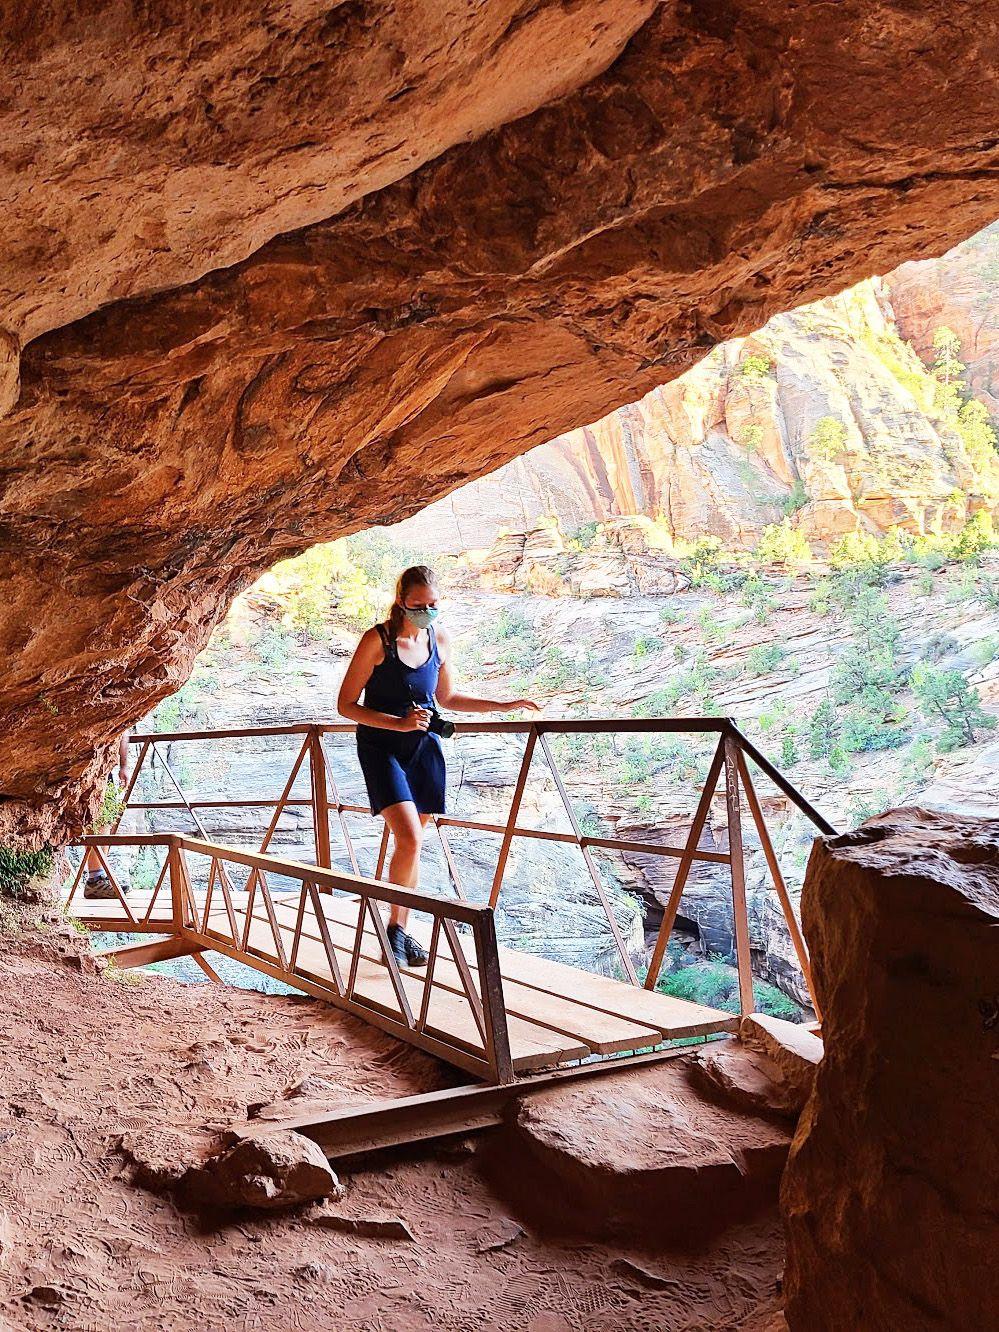 Lydia hiking on a wooden bridge under a rock overhang on the Canyon Overlook Trail in Zion National Park.